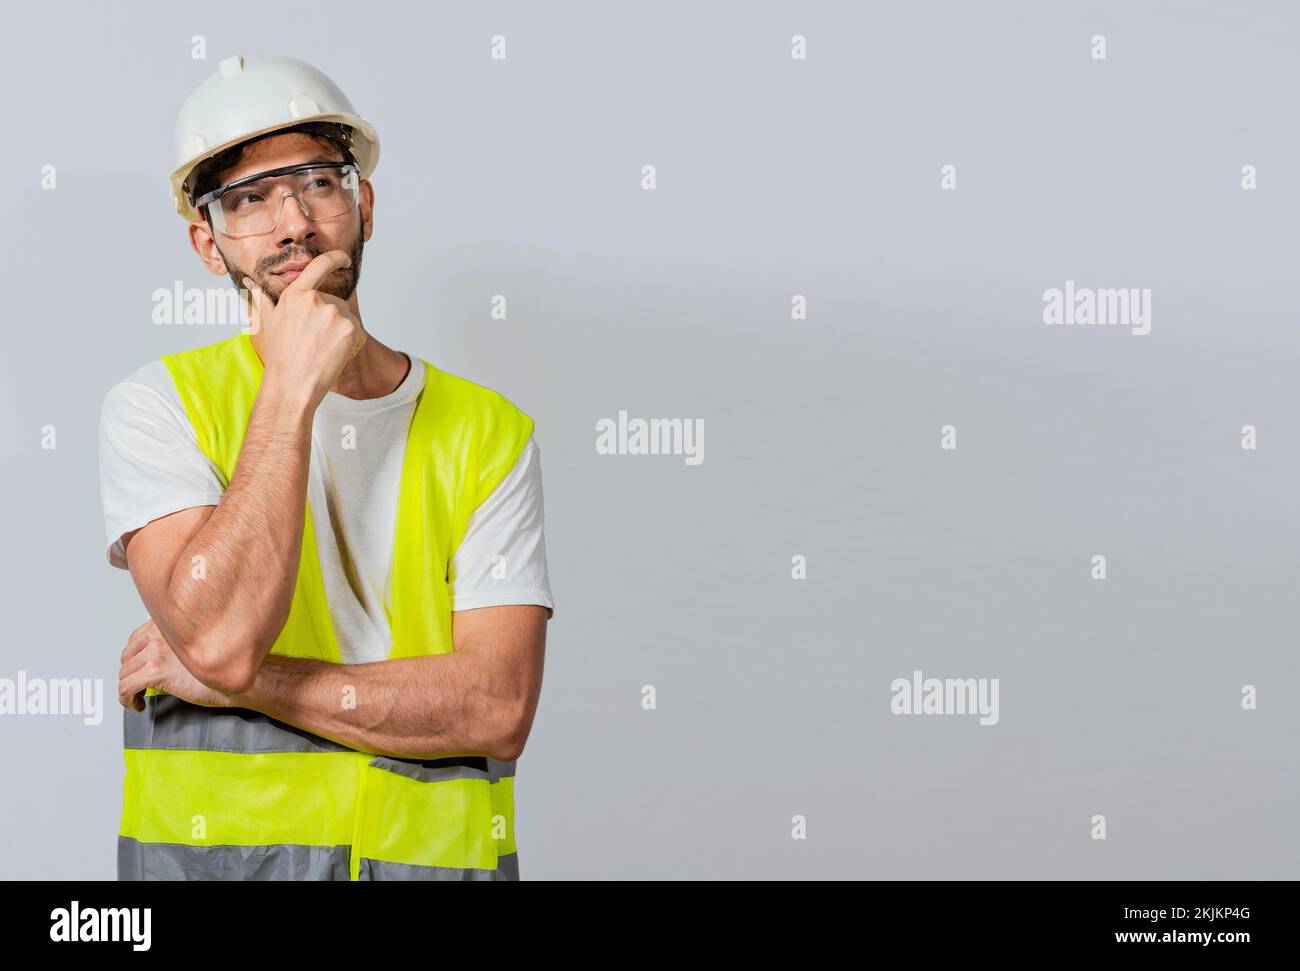 Pensive builder man with hand on chin, Portrait of young builder thinking with hand on chin isolated, A pensive engineer on white background. Concept Stock Photo